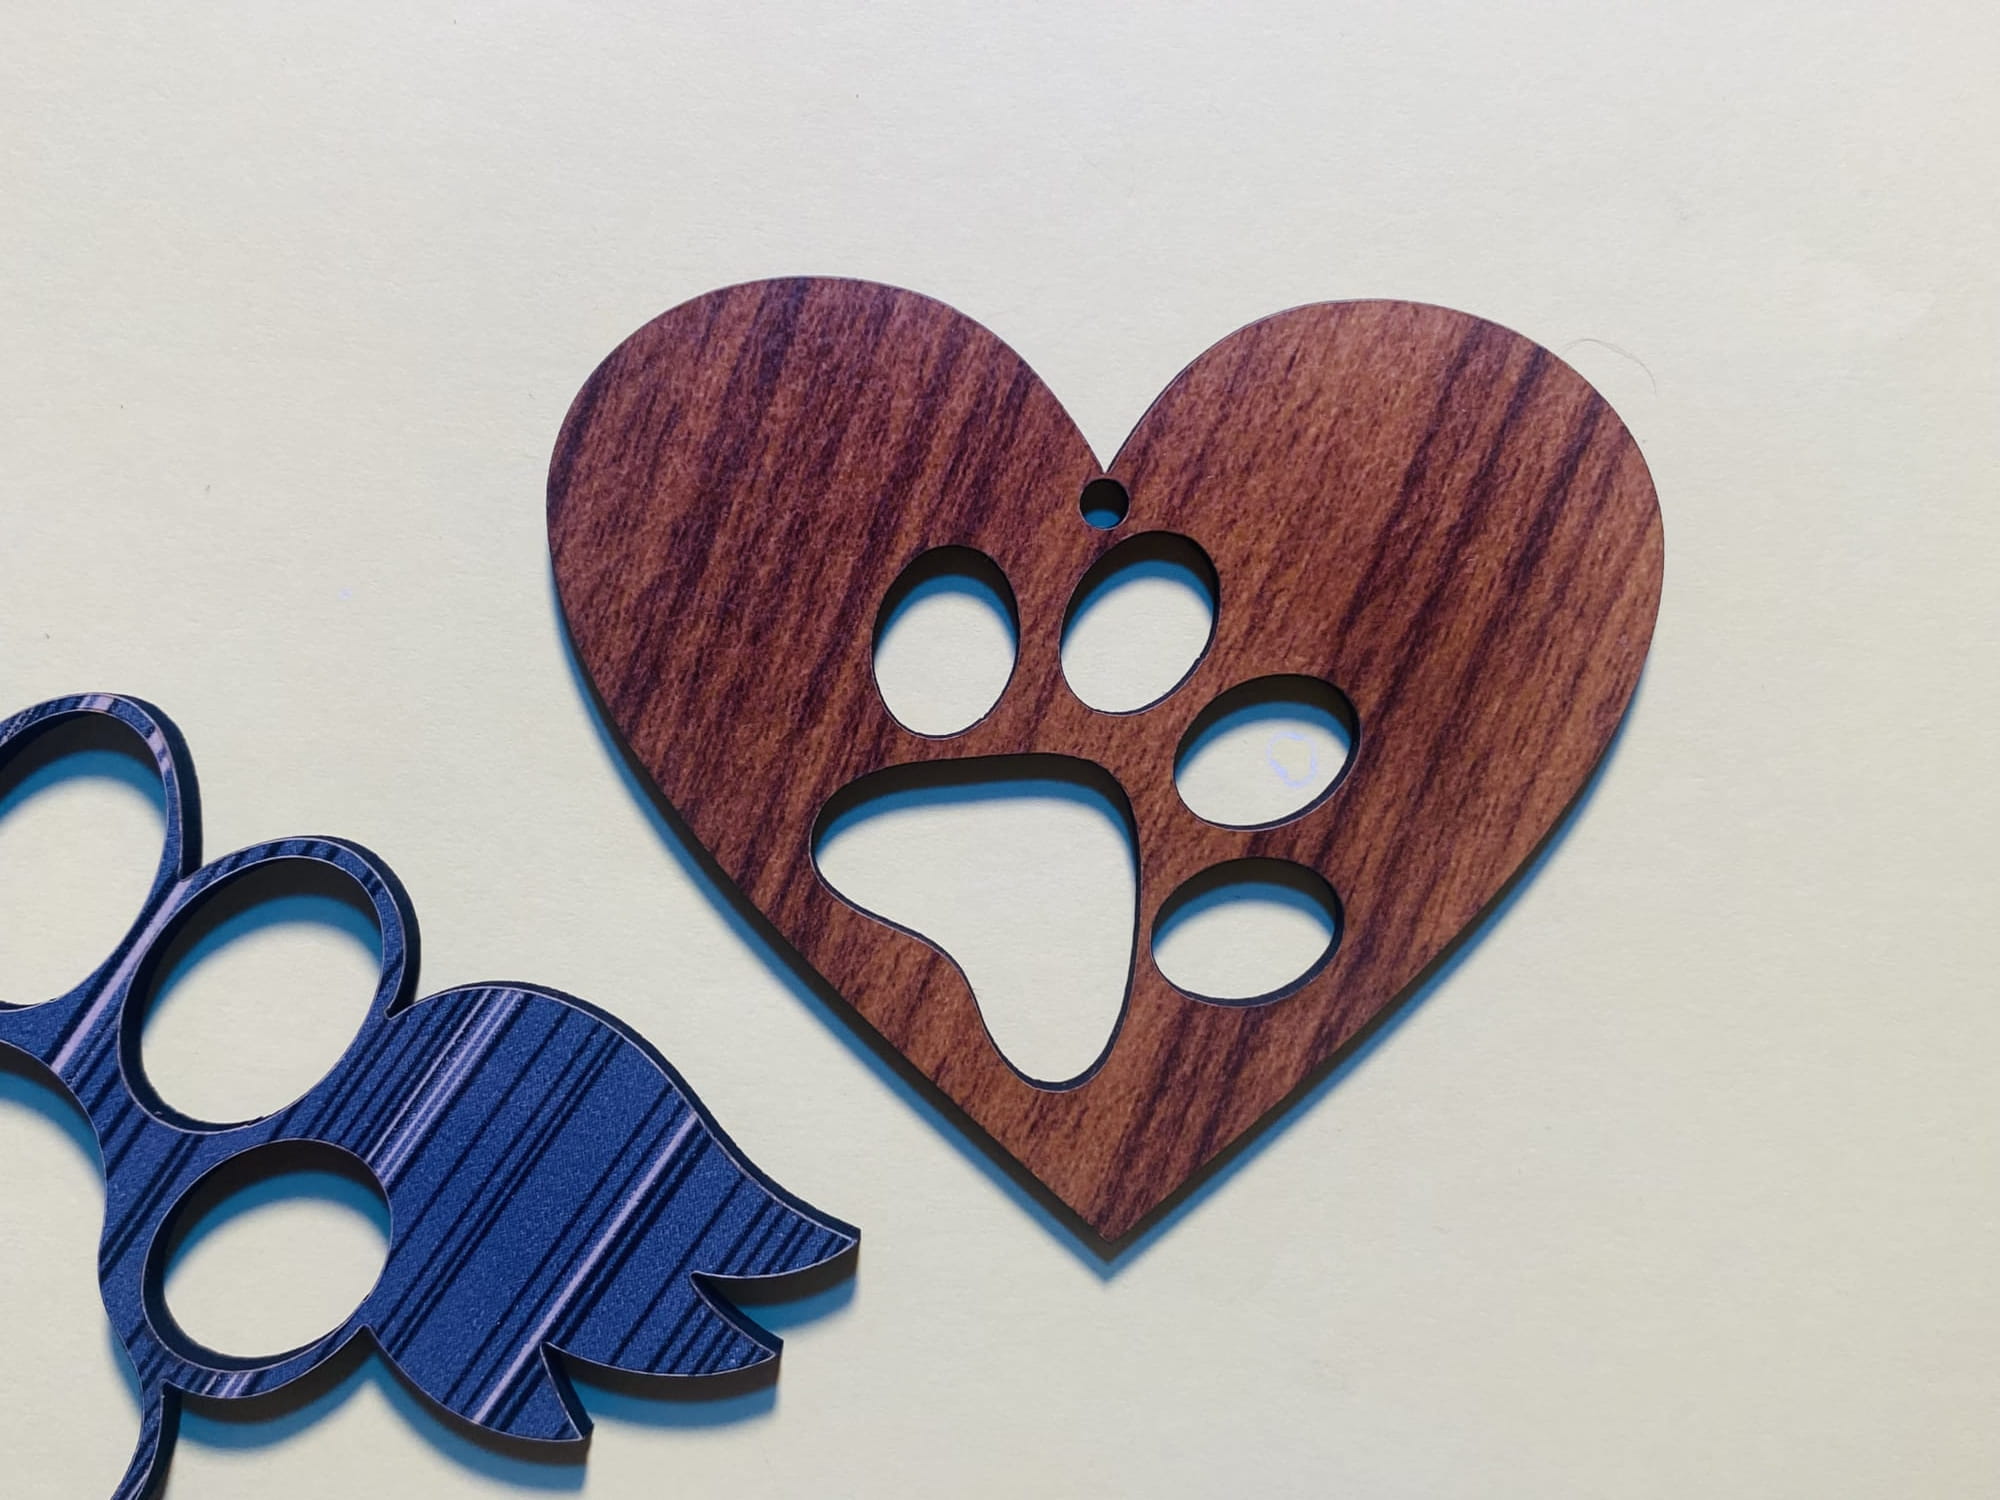 Laser Cut Wooden Heart With Paw Print Christmas Tree Decoration Hanging Ornament Free Vector